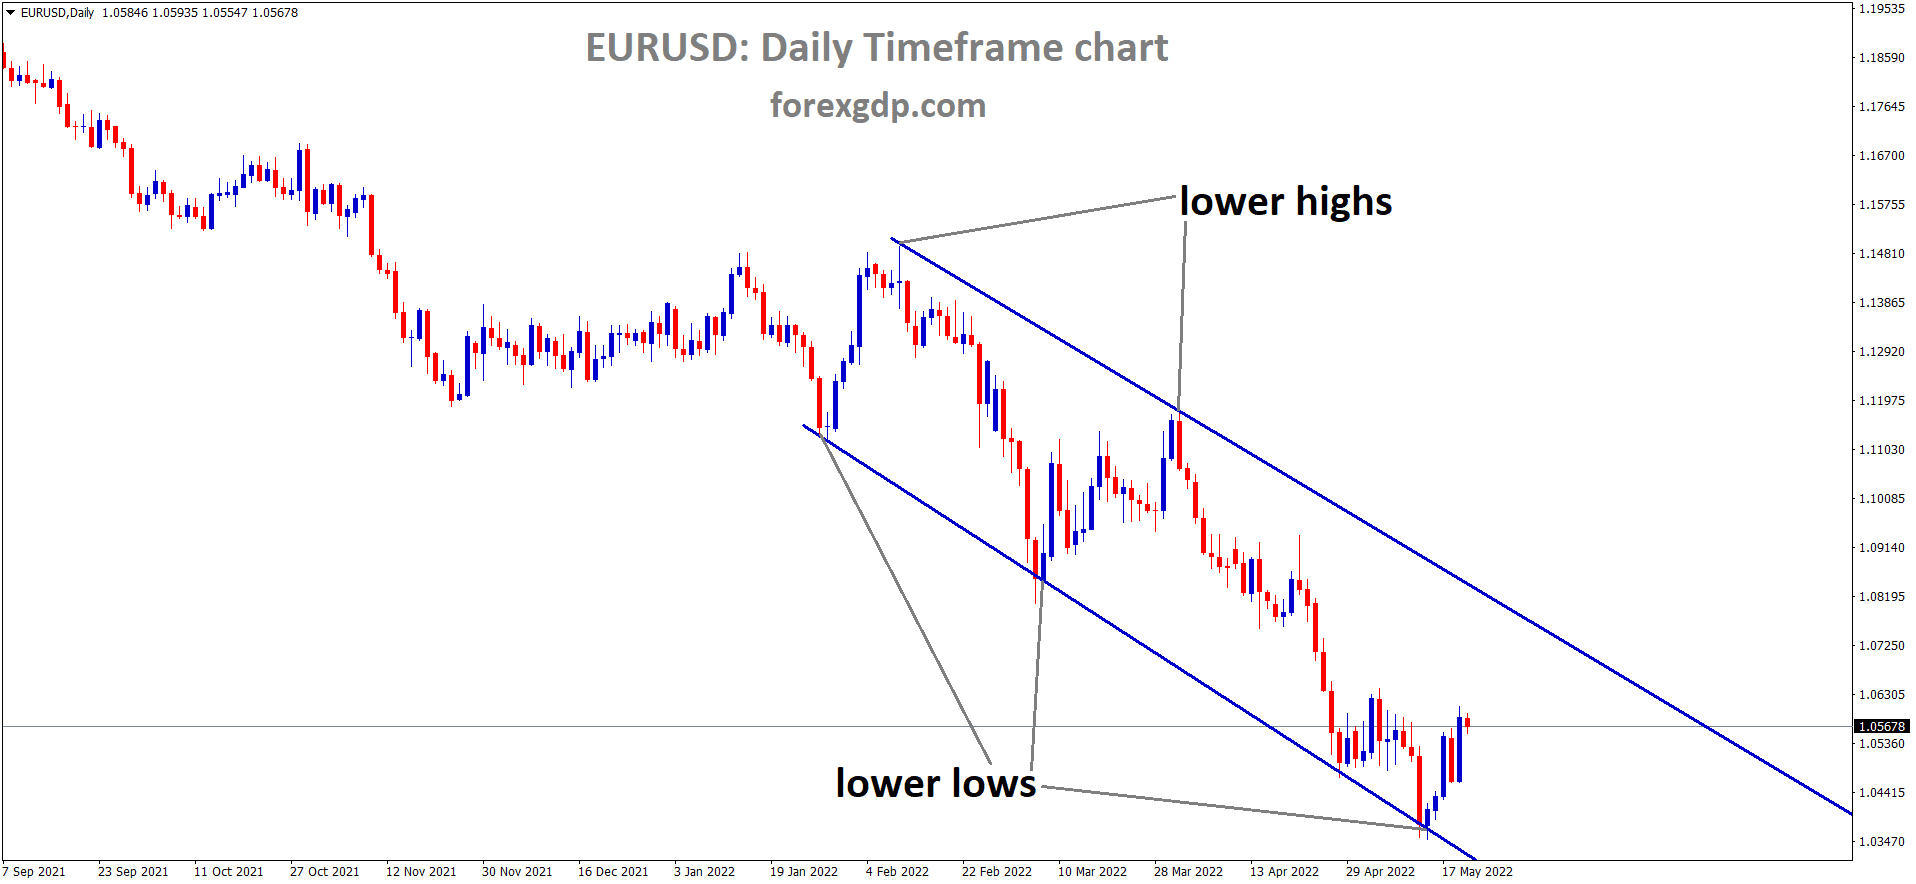 EURUSD Daily Time Frame Analysis Market is moving in the Descending channel and the market has rebounded from the lower low area of the Channel 1